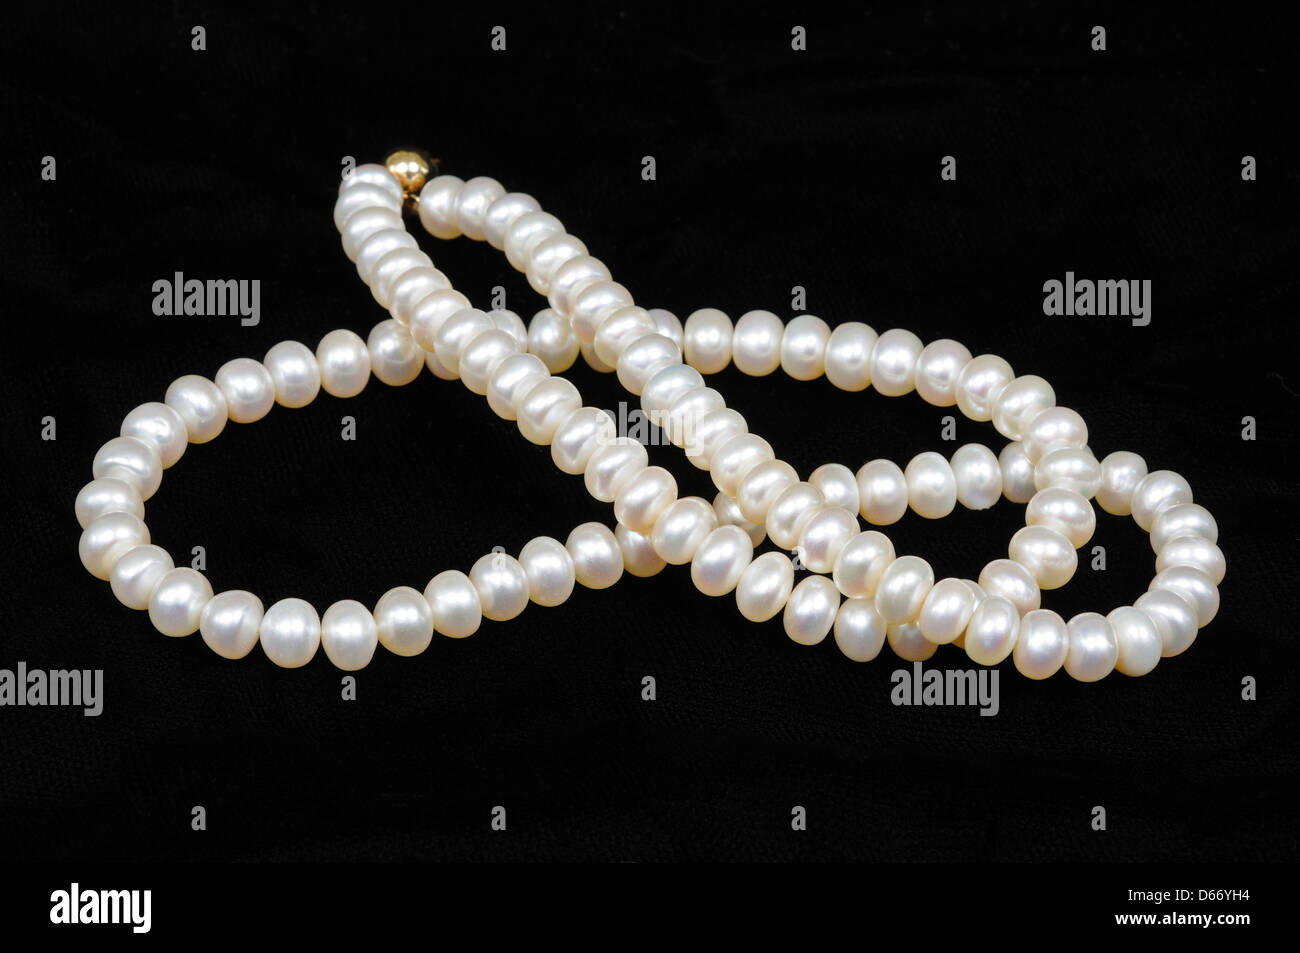 Cultivated pearl necklace against a black background. Stock Photo